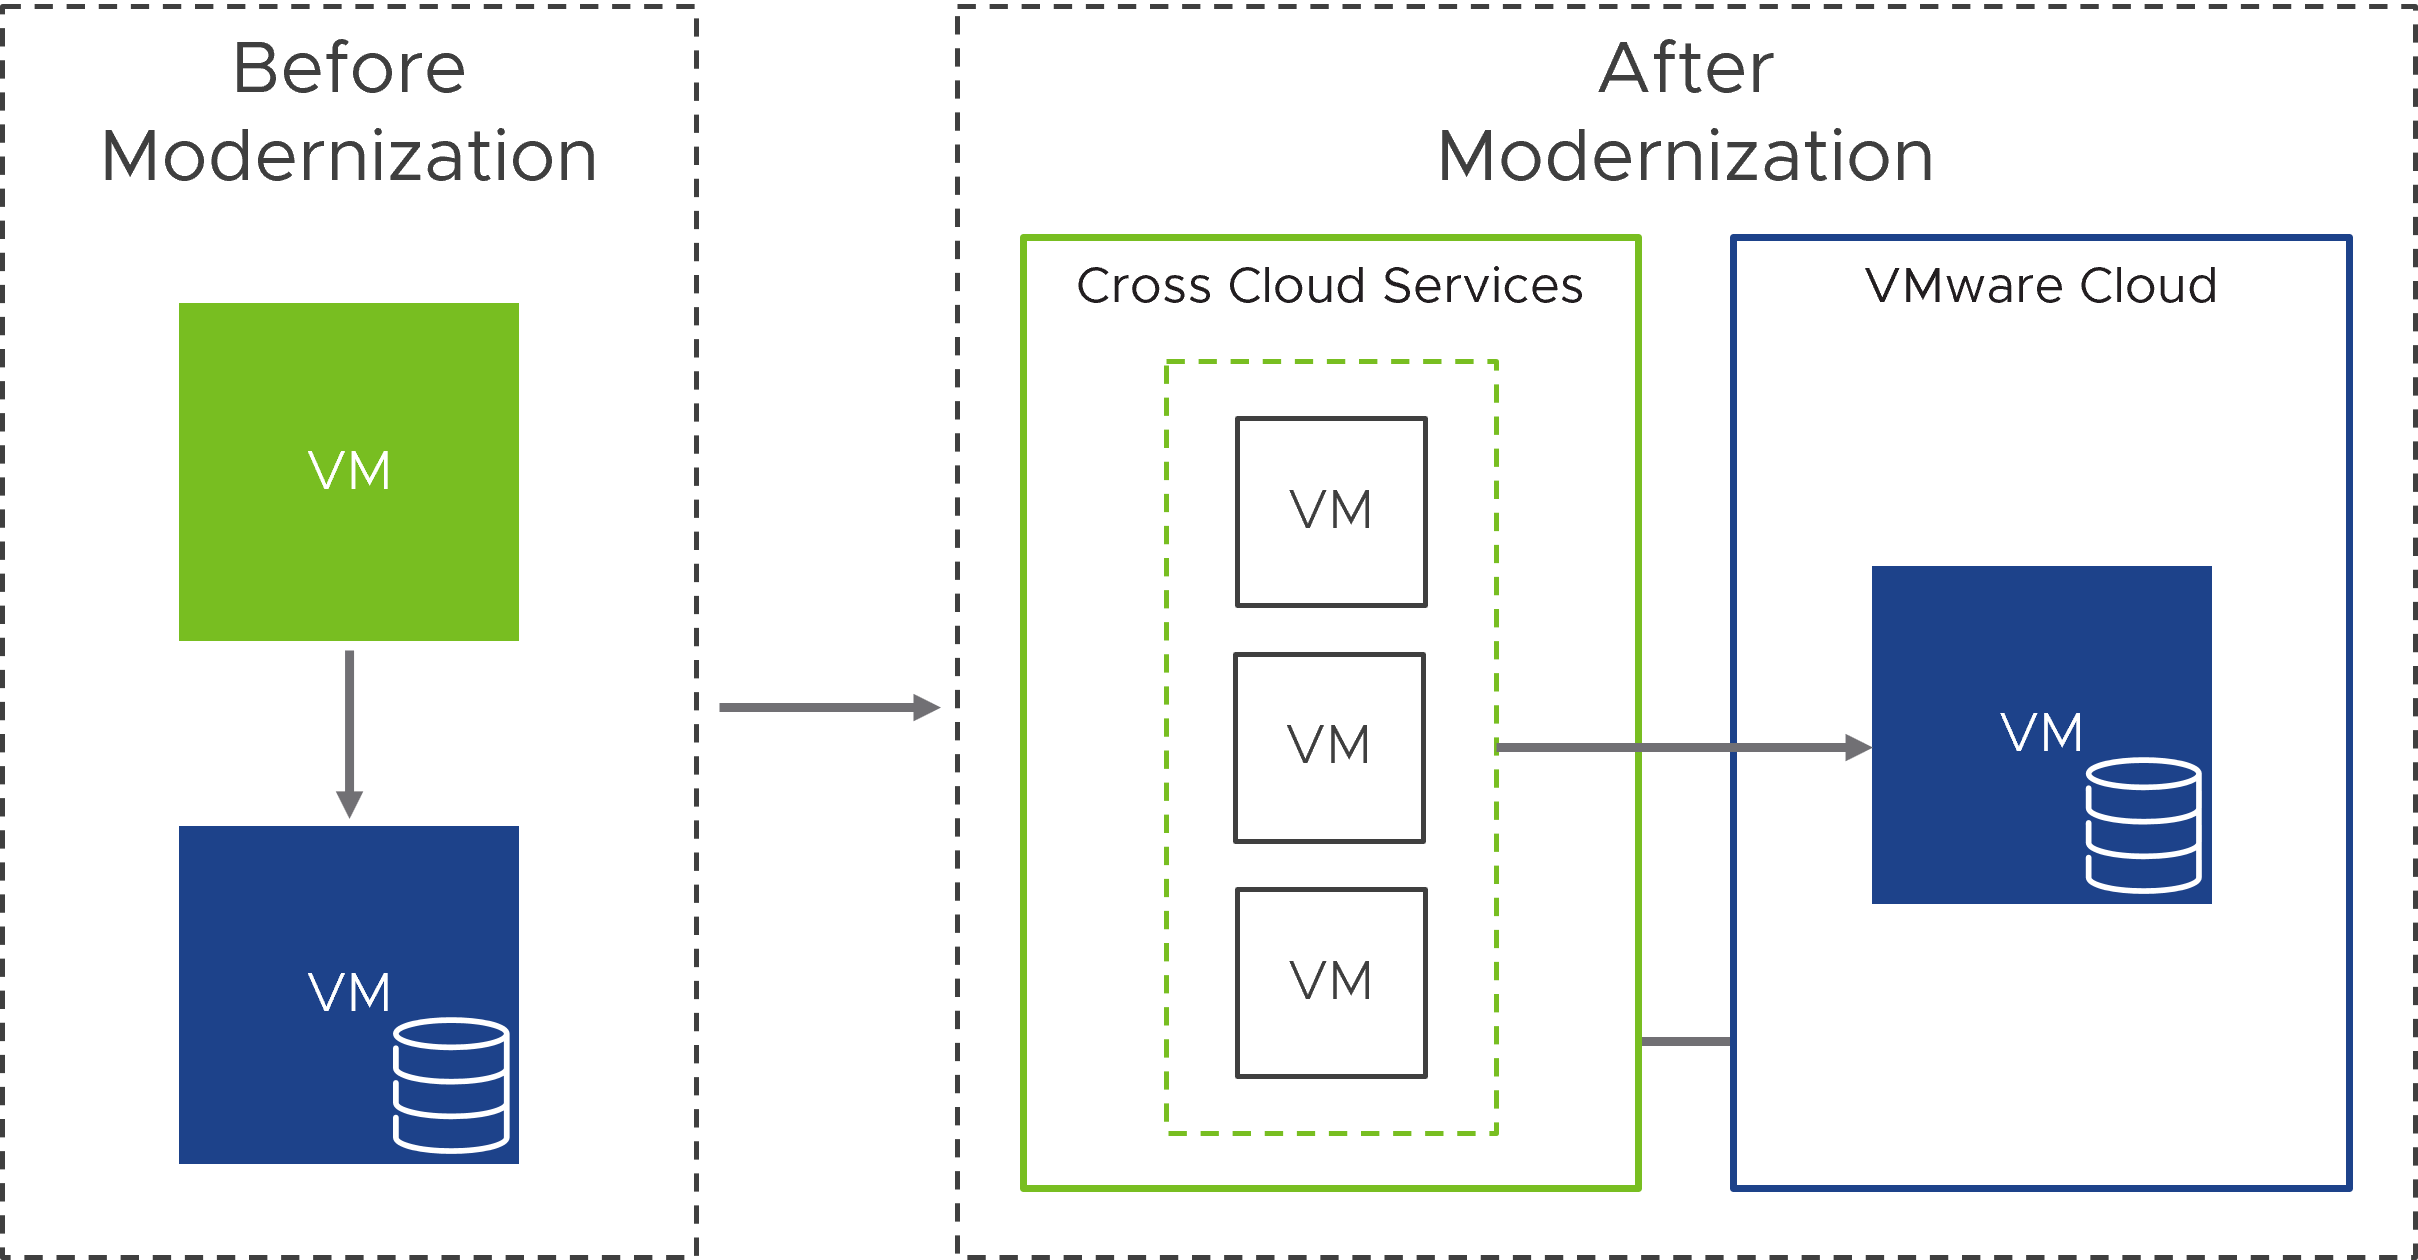 Before and ater modernization - Moving application VMs to the cloud.